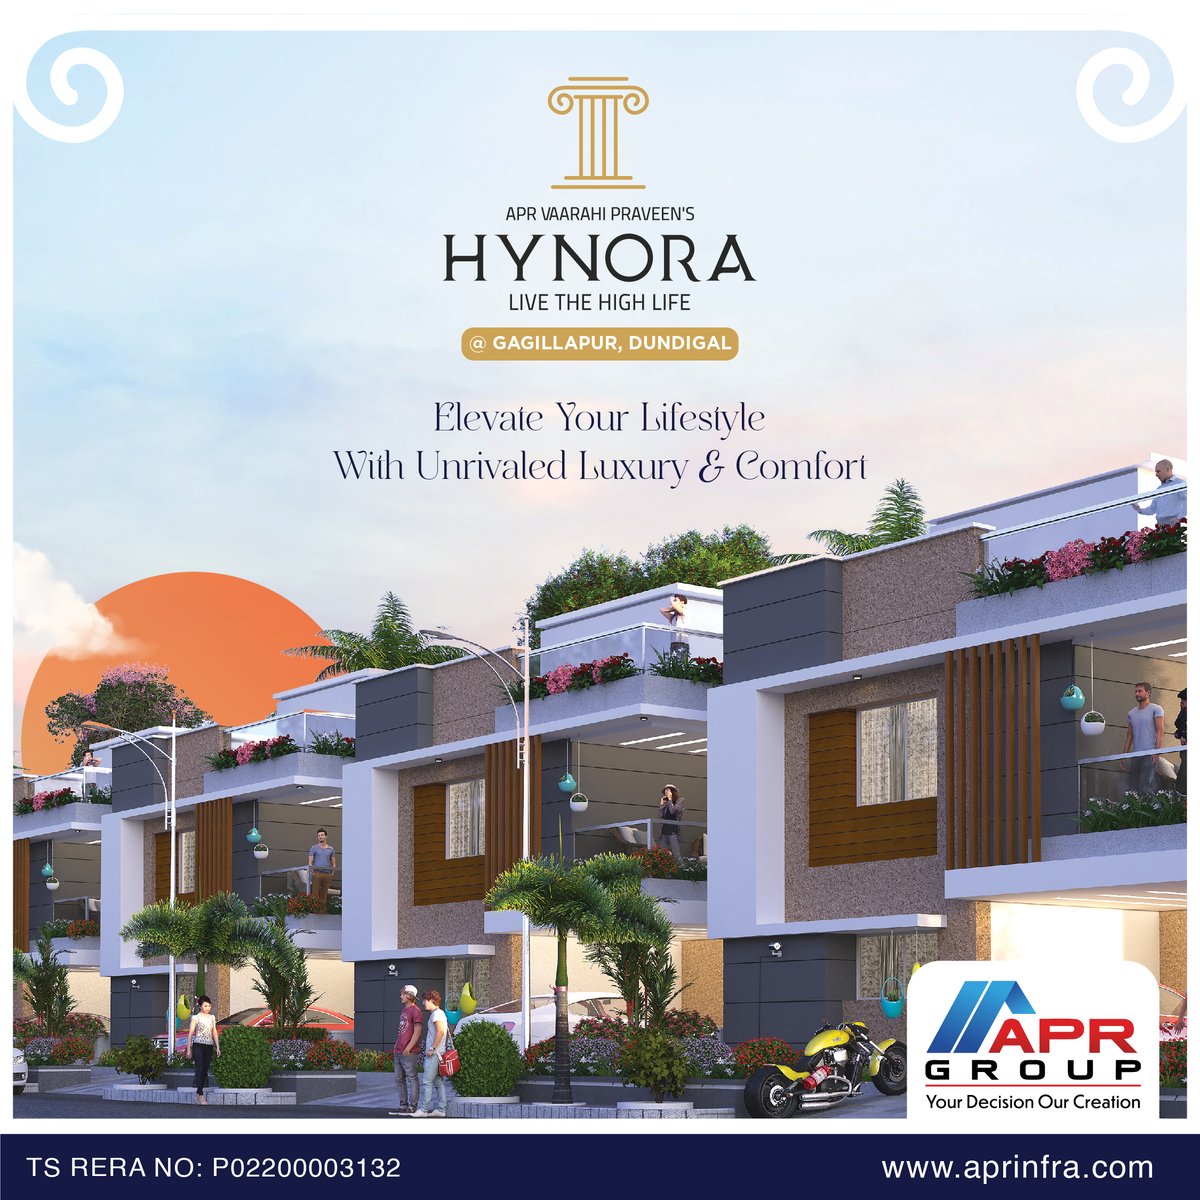 Elevate your lifestyle with the state-of-the-art amenities and the allure of a truly modern sanctuary. Welcome home to the future of living!
.
#APRGroup #AprInfra #APR #APRProjects #Hynora #duplexvillas #3bhkvillas #comfortliving #luxurycomfort #villasforsale #homesinhyderabad